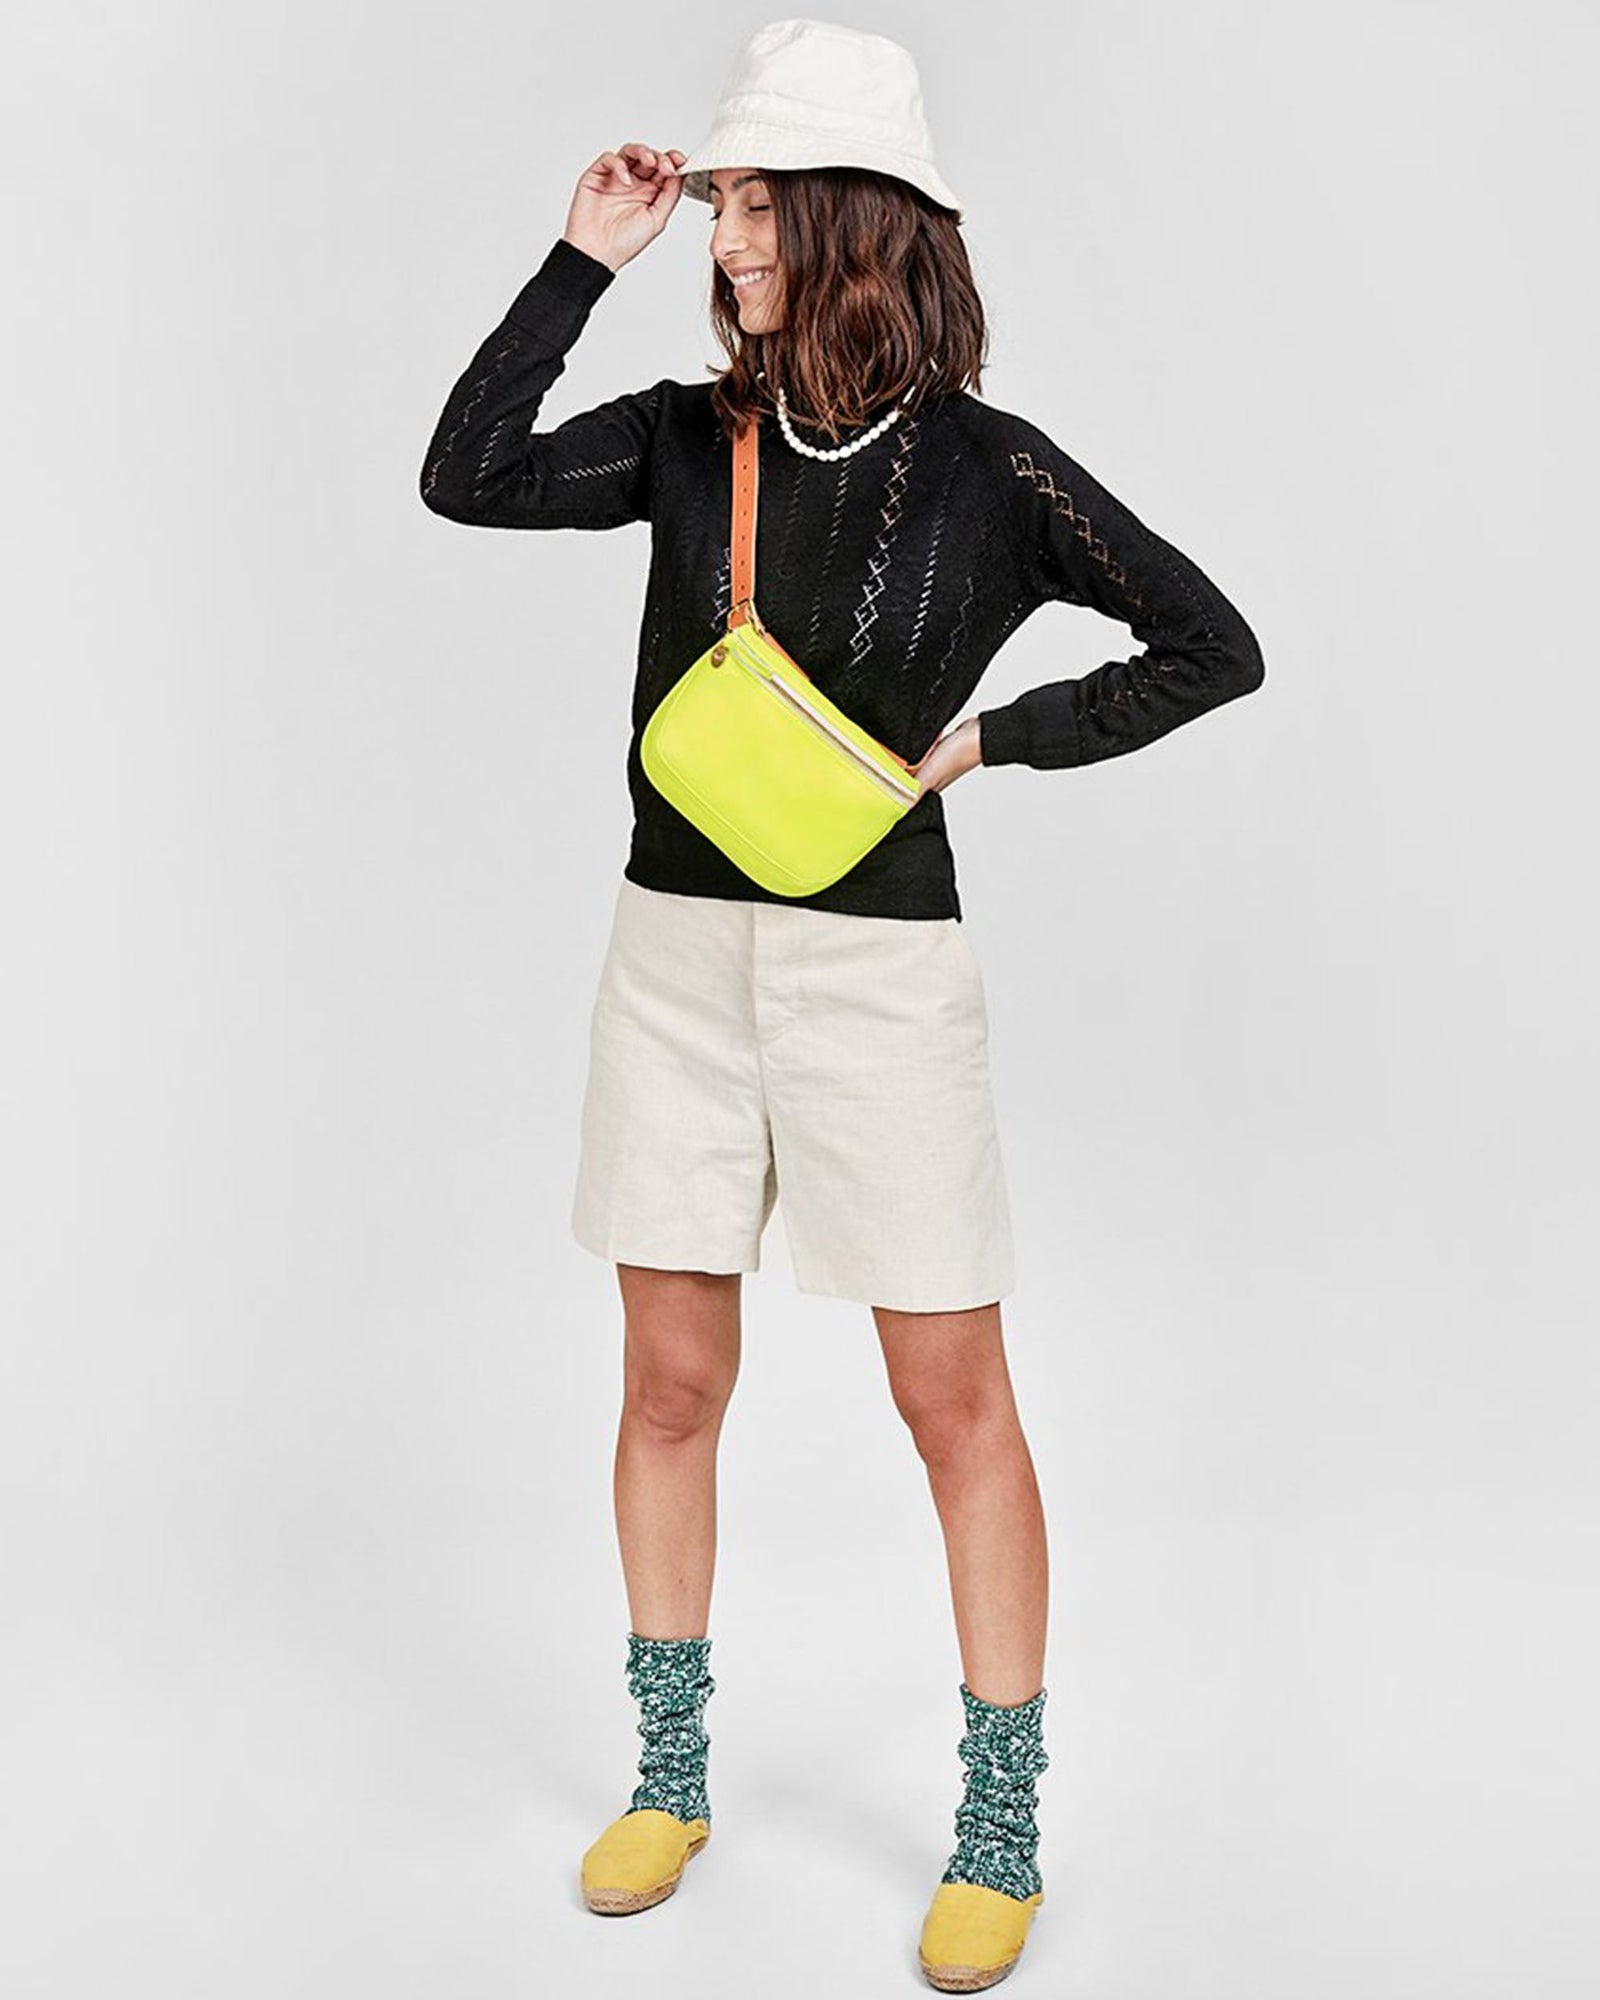 Neon Yellow Fanny Pack on Frannie